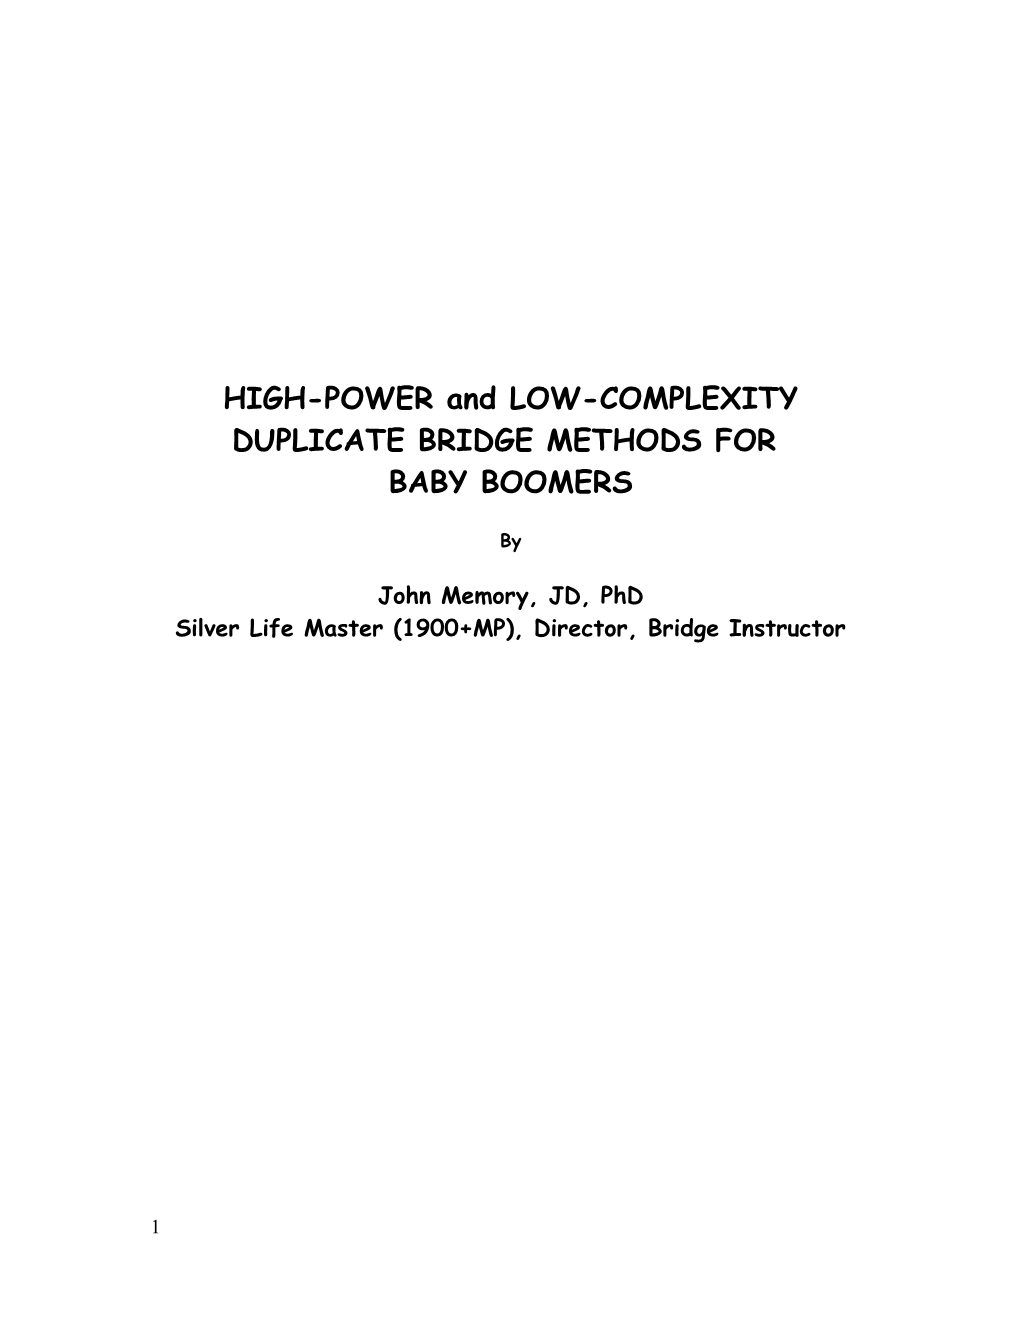 HIGH-POWER and LOW-COMPLEXITY DUPLICATE BRIDGE METHODS for BABY BOOMERS